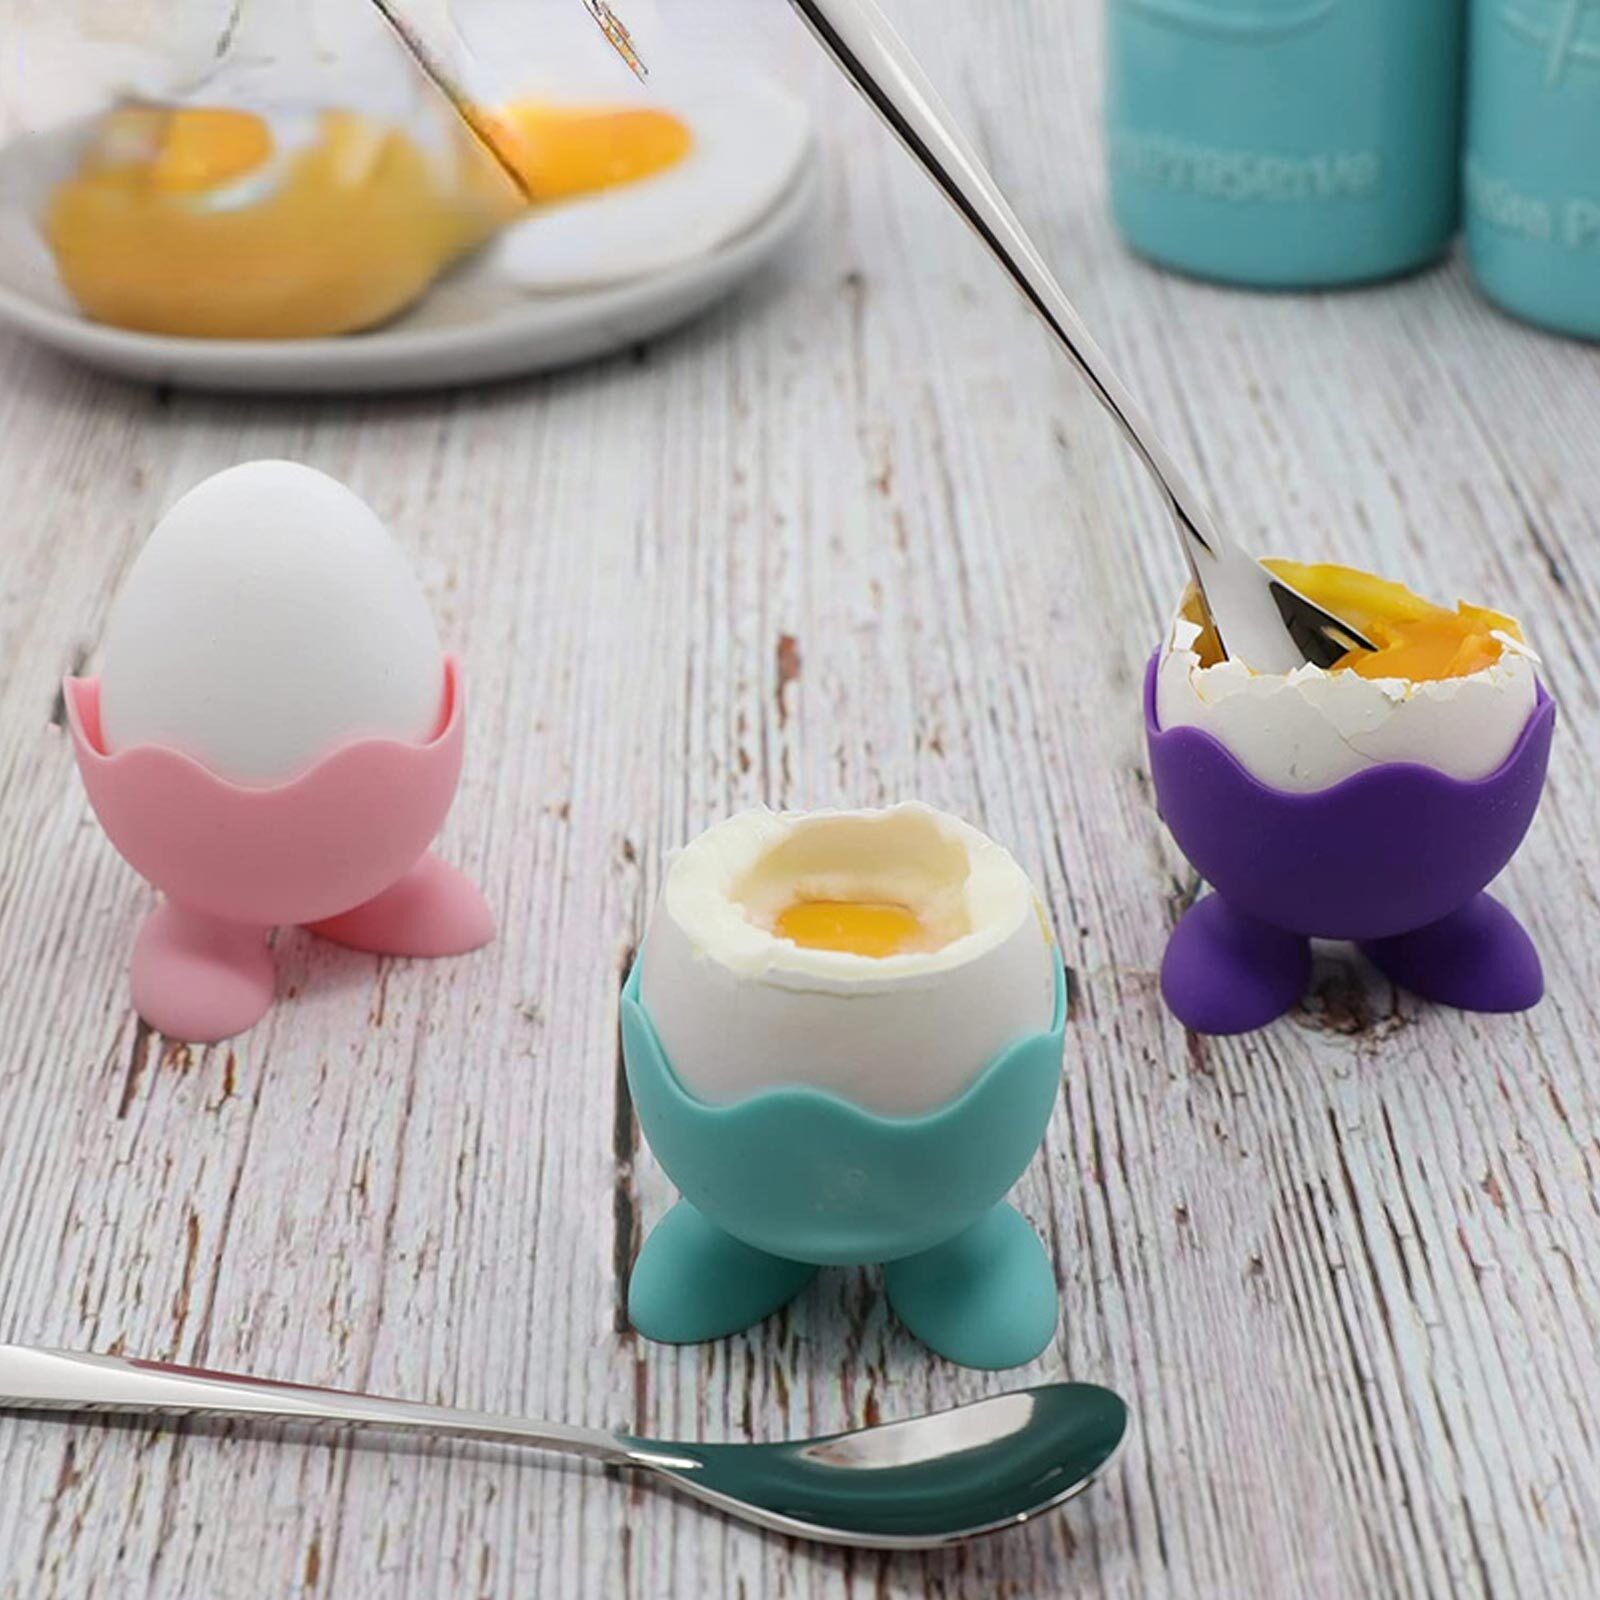 Silicone Egg Cup Holders Kitchen Breakfast Boiled Eggs Serving Cups Set 3pcs